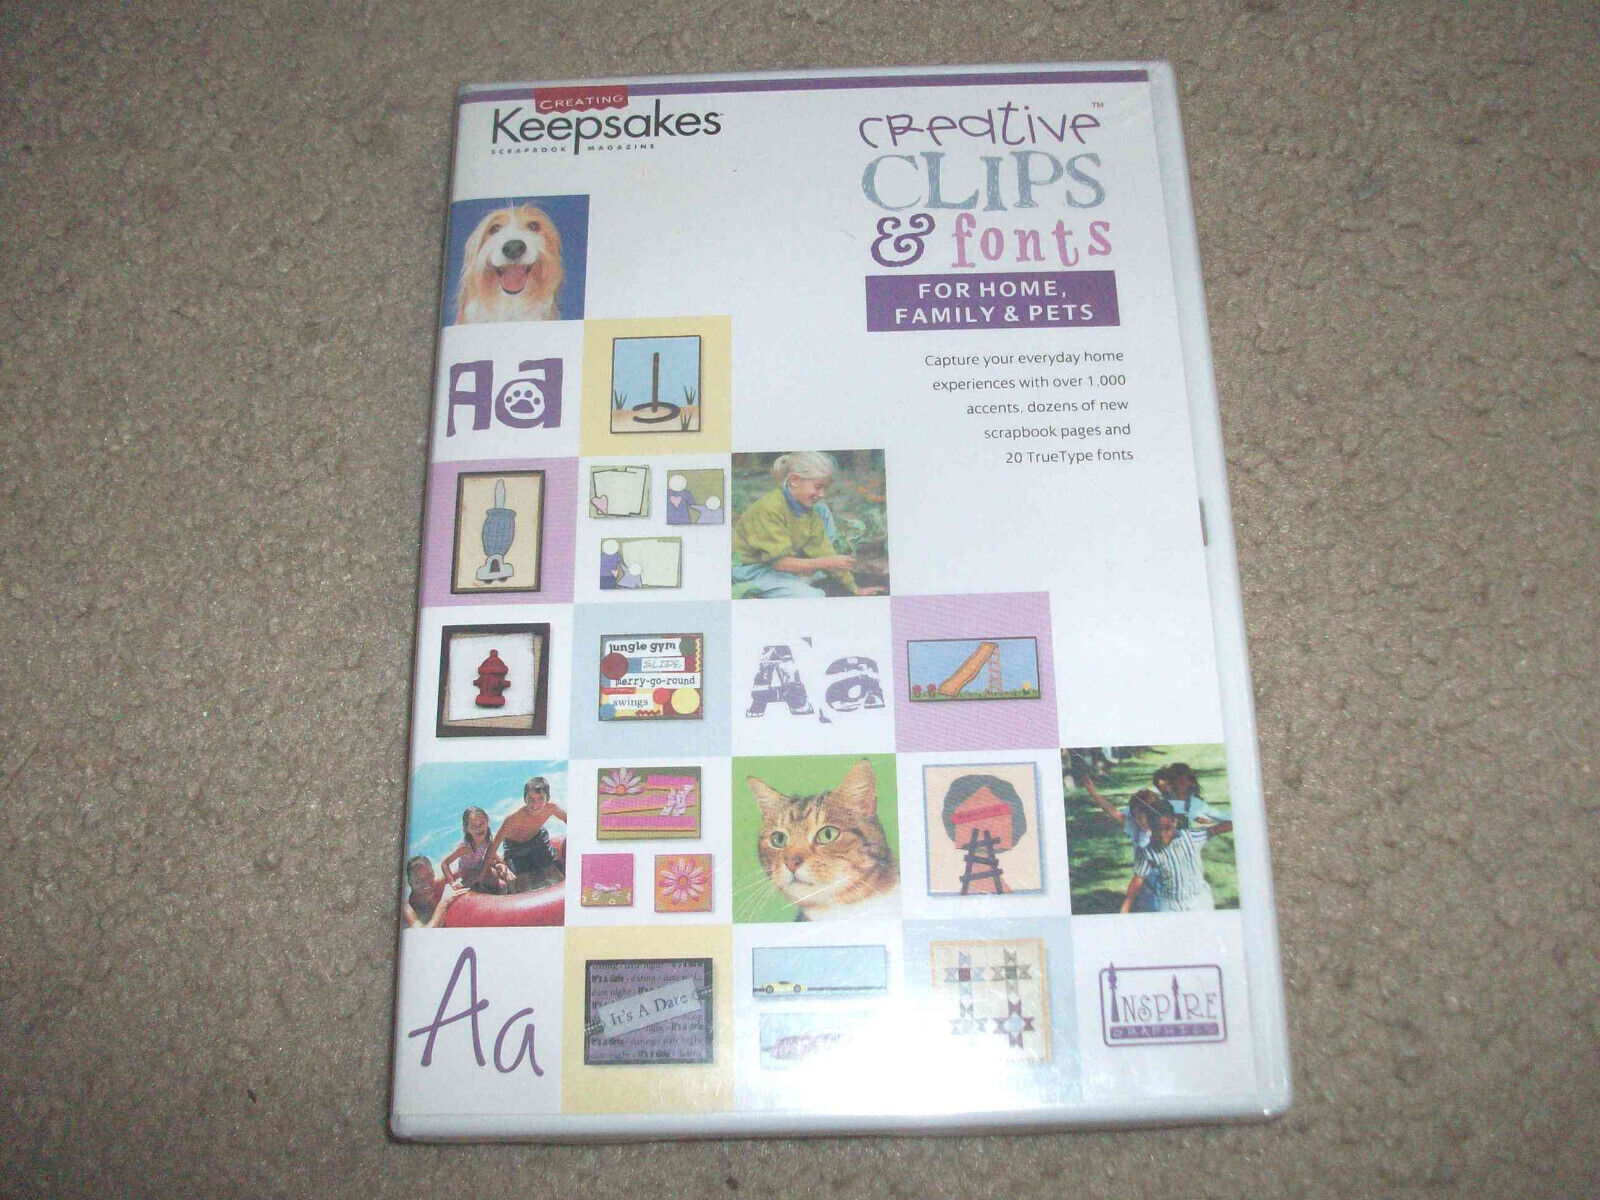 New Creating Keepsakes Creative Clips & Fonts CD for Home, Family & Pets win&mac